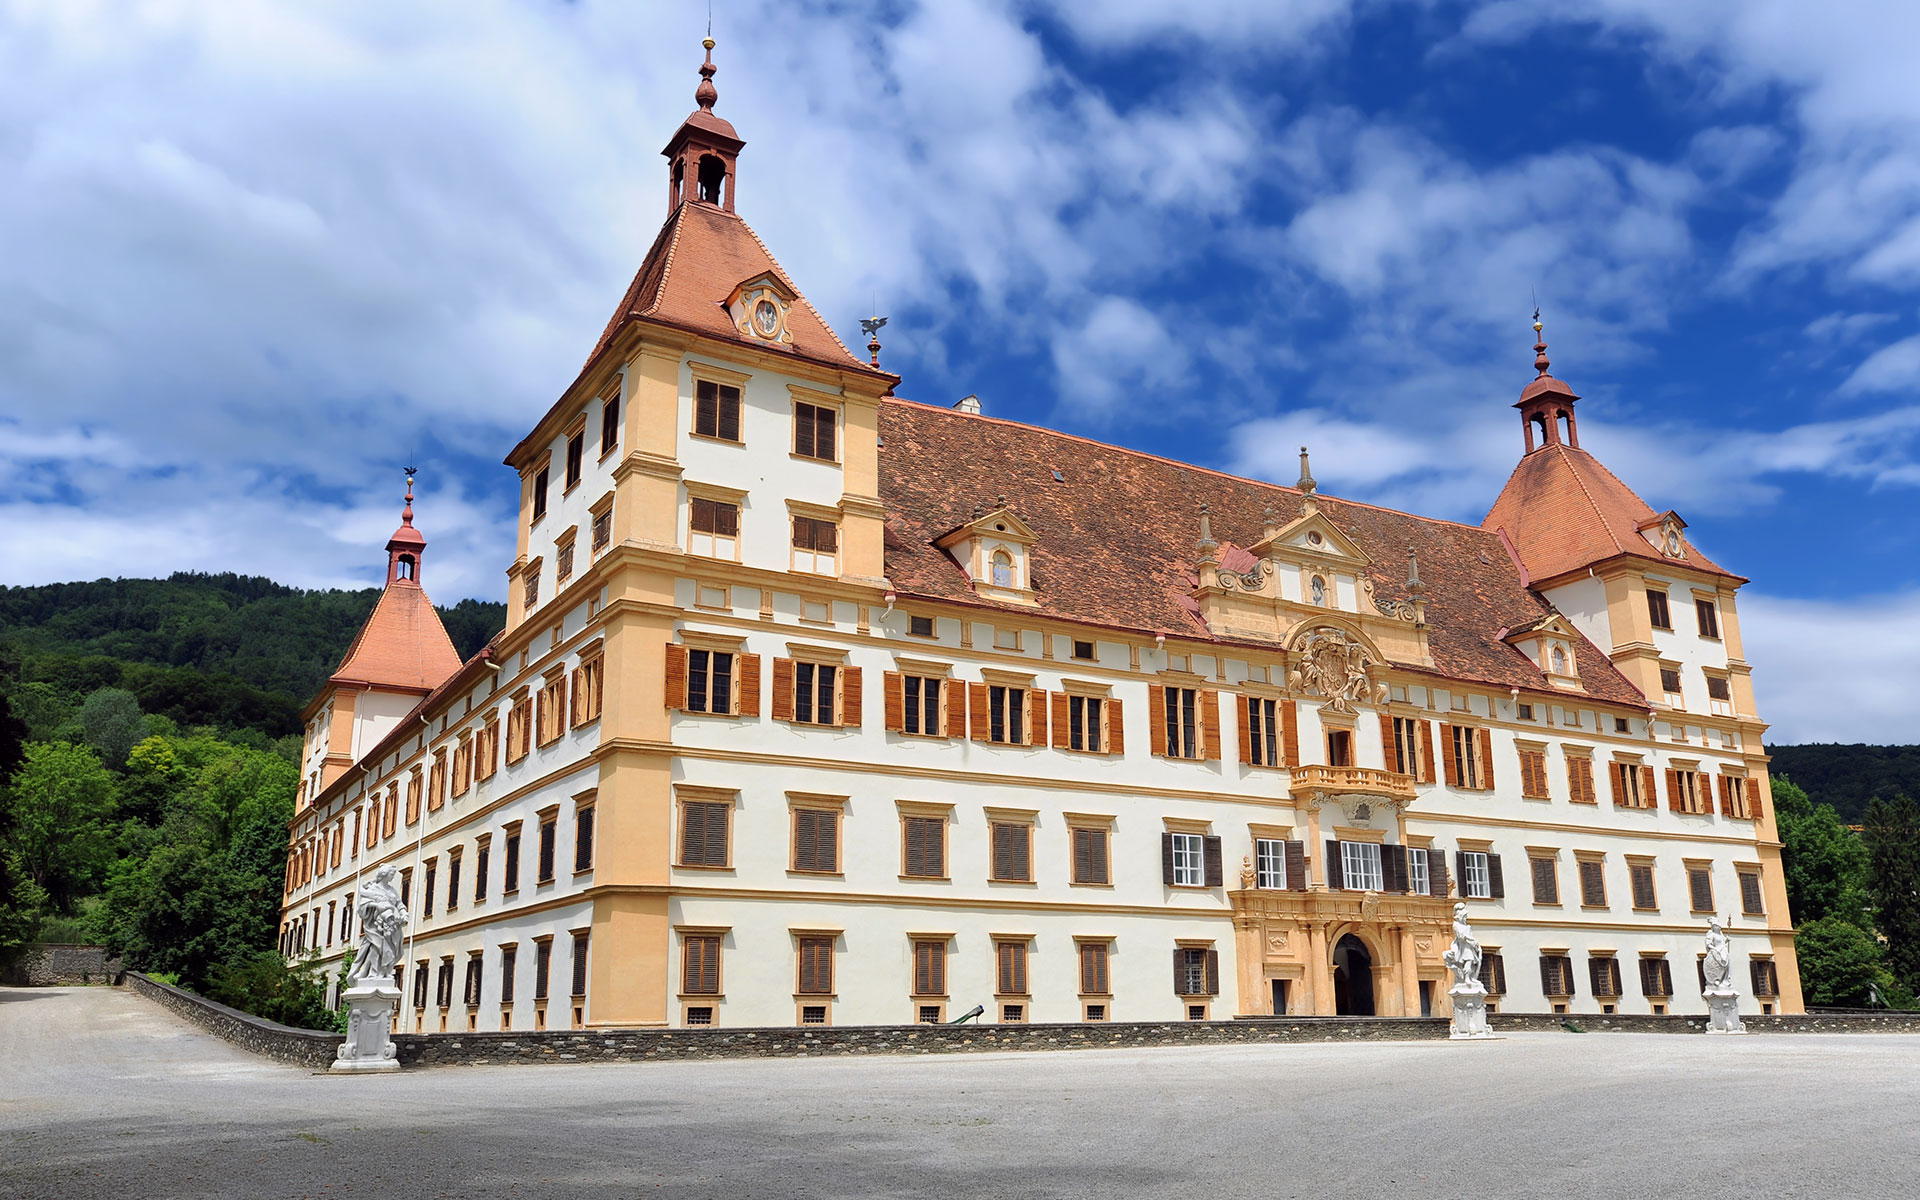 The Eggenberg Palace on the western edge of Graz - the Styrian capital will get a direct link from Berlin and Dresden from early May 2020 (photo © Pavle Marjanovic / dreamstime.com).